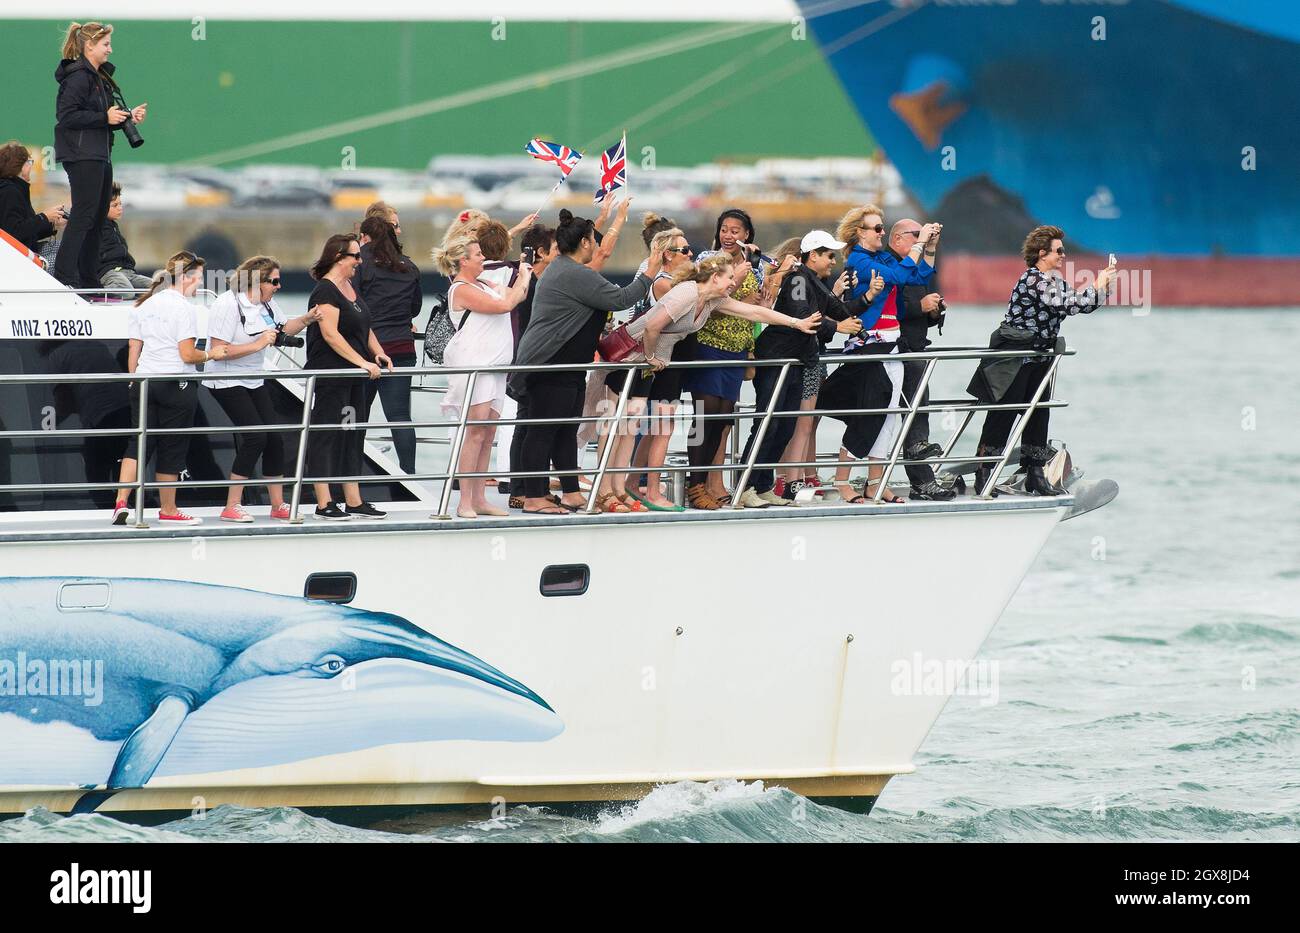 Royal fans follow by boat to watch Catherine, Duchess of Cambridge and Prince William, Duke of Cambridge race America's Cup yachts in Aukland Harbour, New Zealand on April 11, 2014.    Stock Photo